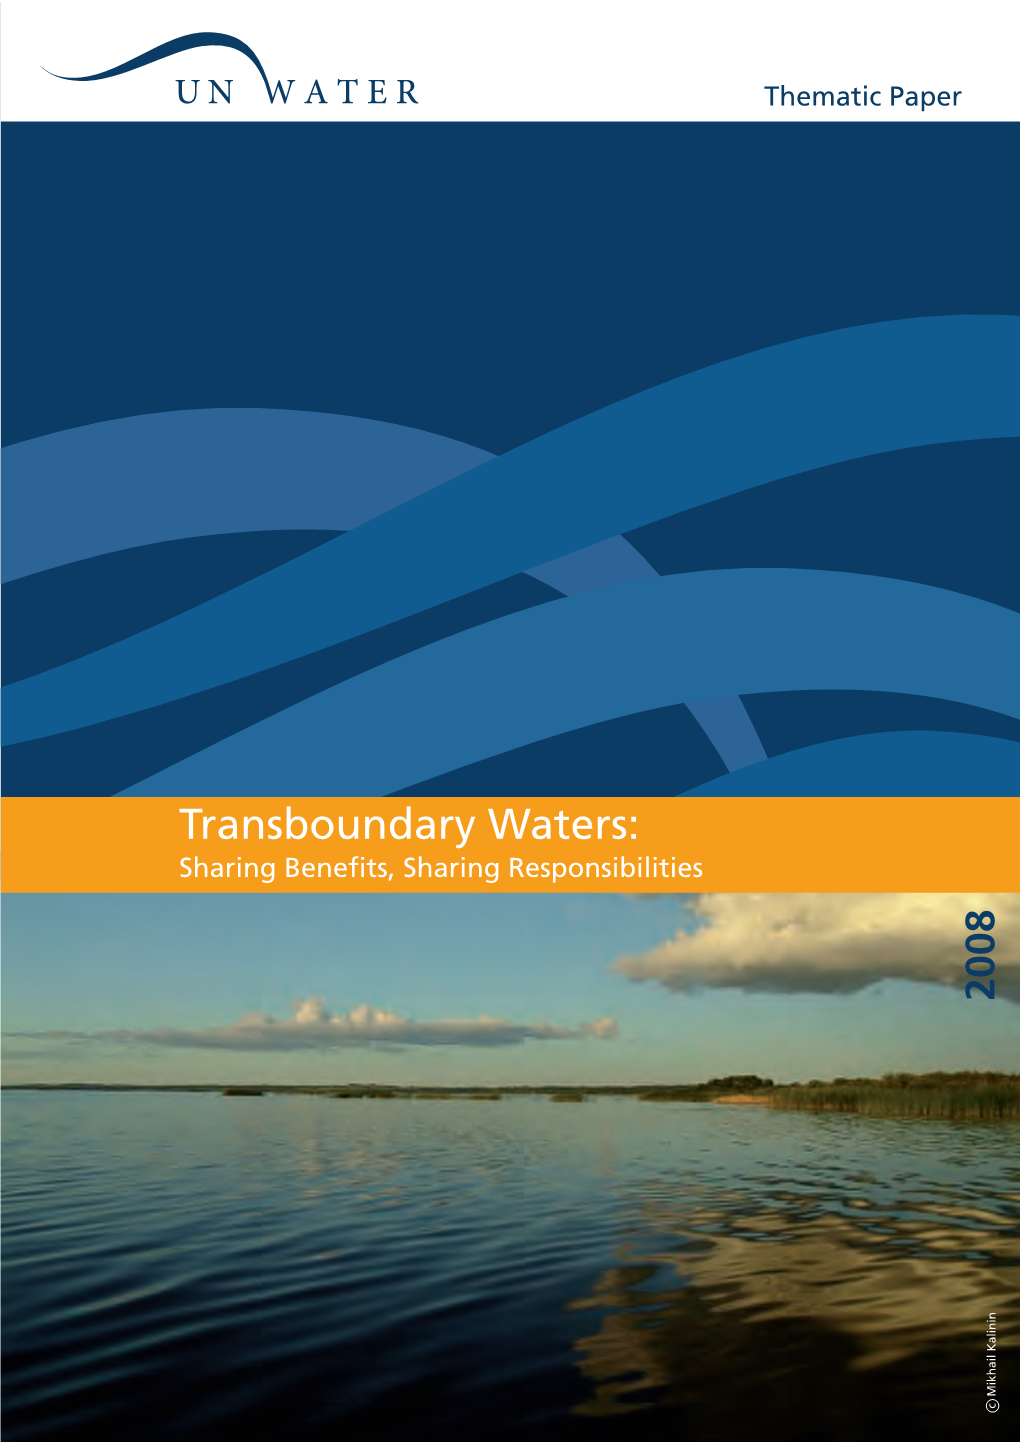 Transboundary Waters: Thematic Paper